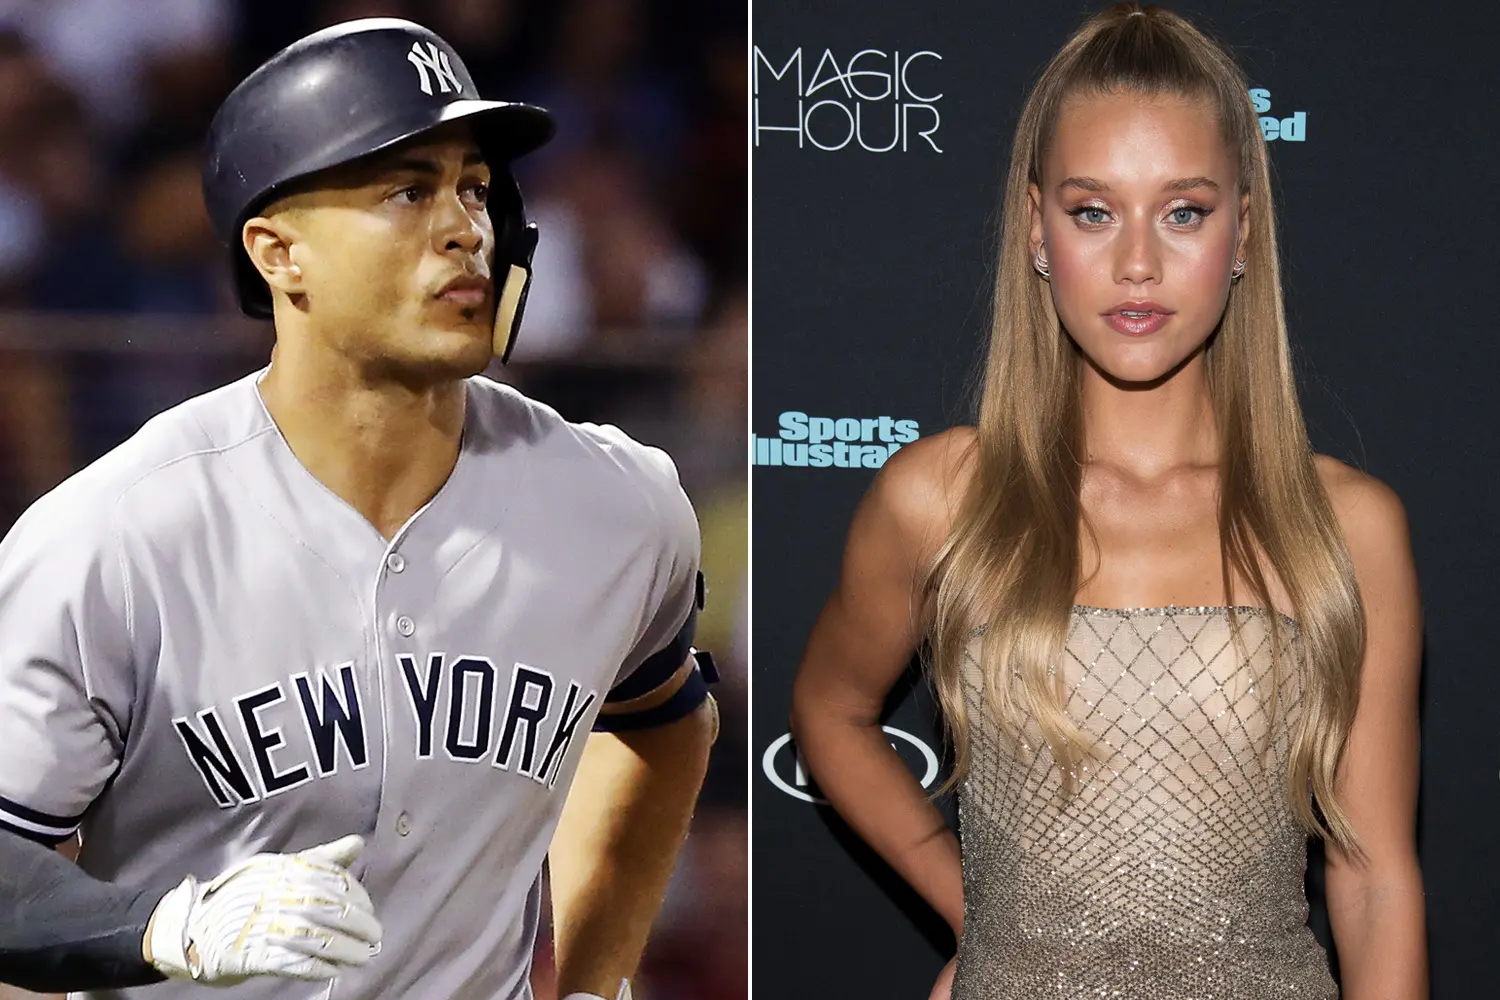  Heartbreaking News: Giancarlo Stanton and Wife Announce Separation due to….